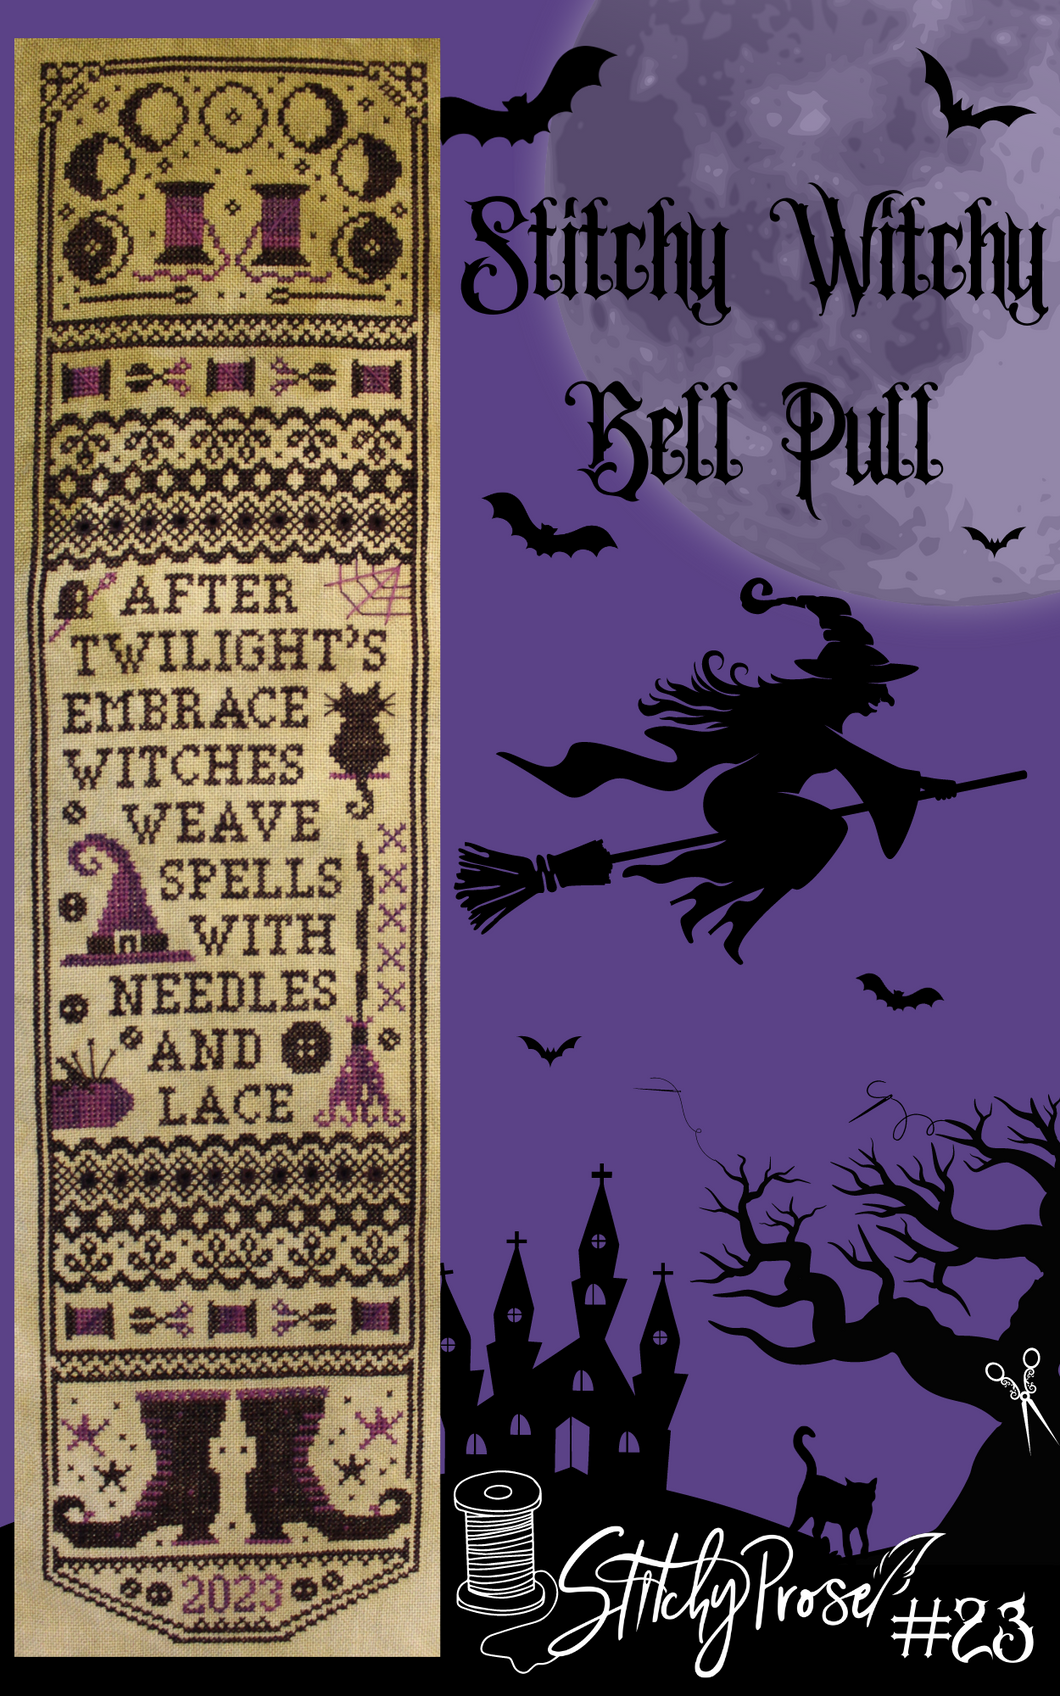 Stitchy Witchy Bell Pull *MARKETPLACE EXCLUSIVE*